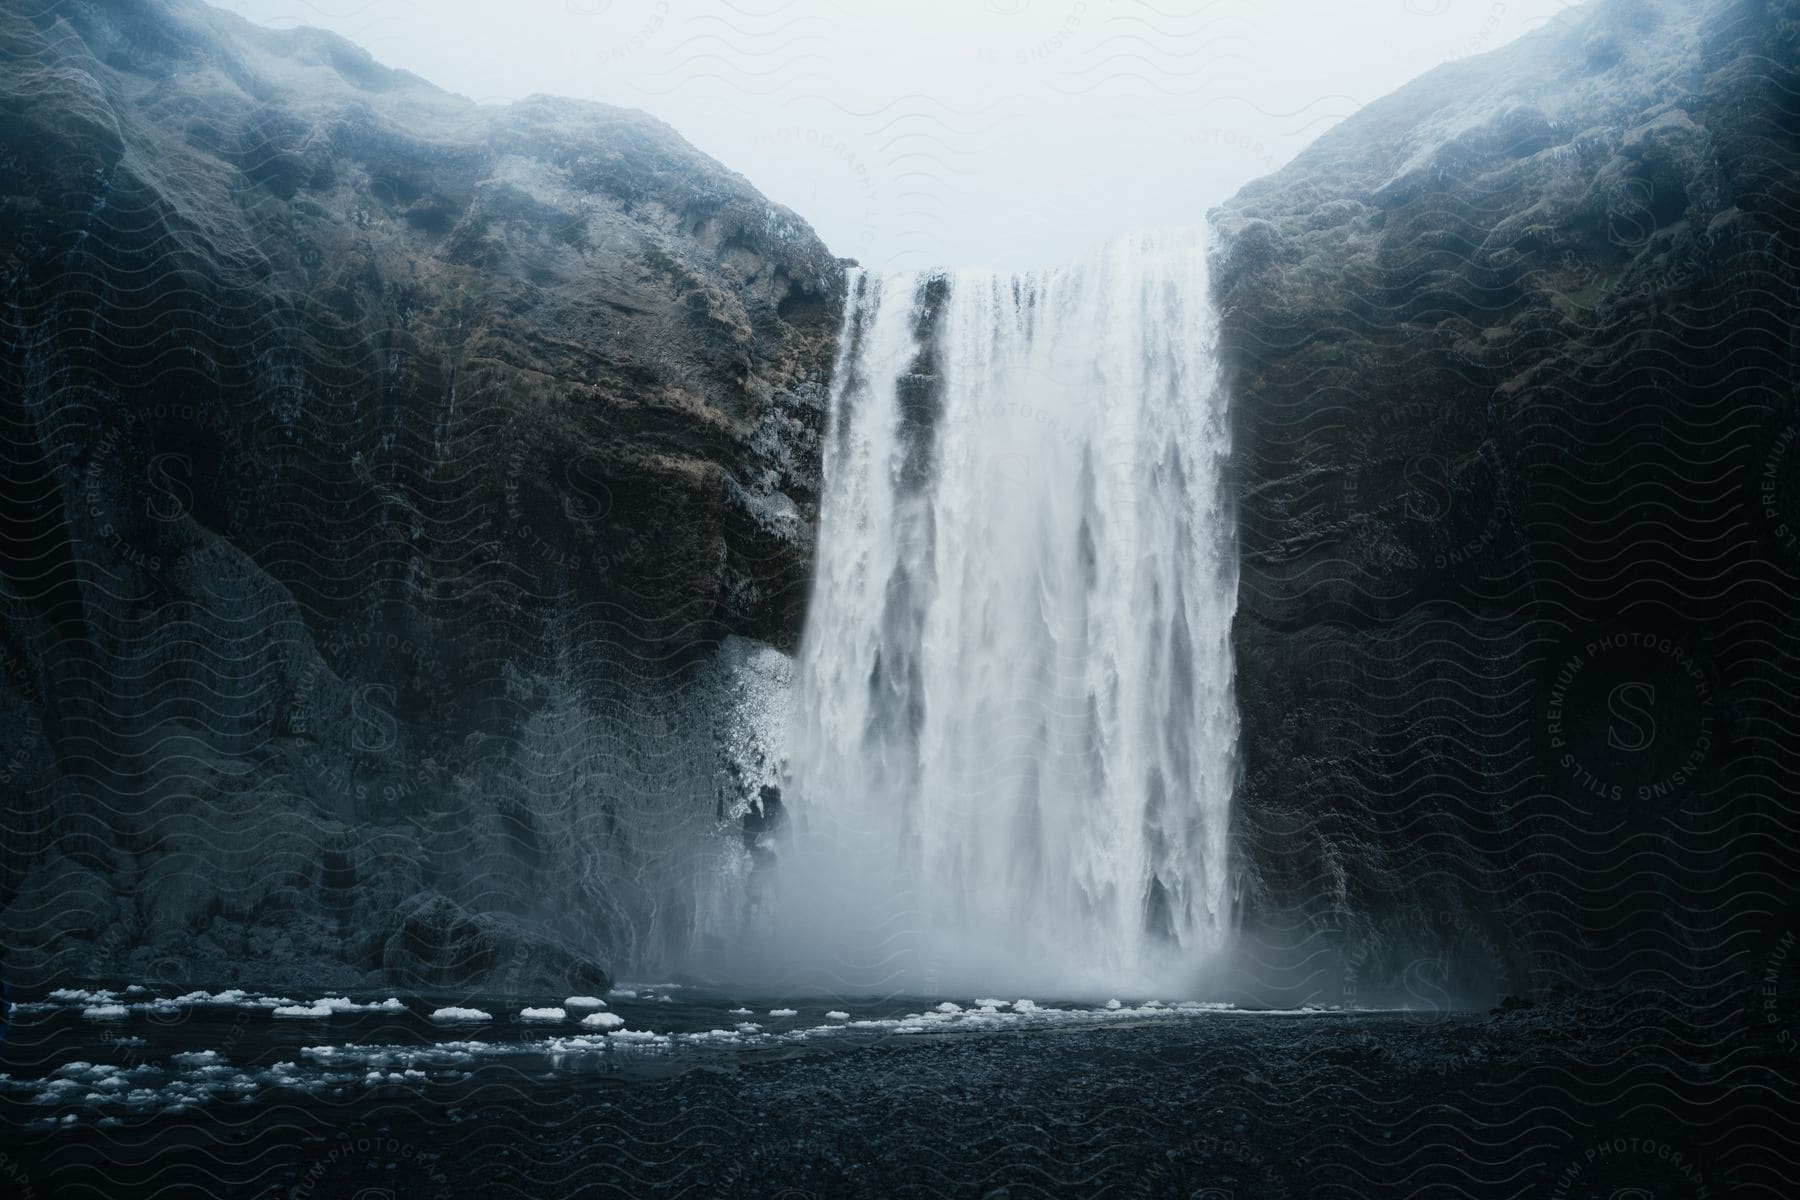 powerful waterfall cascades over a rugged cliff face